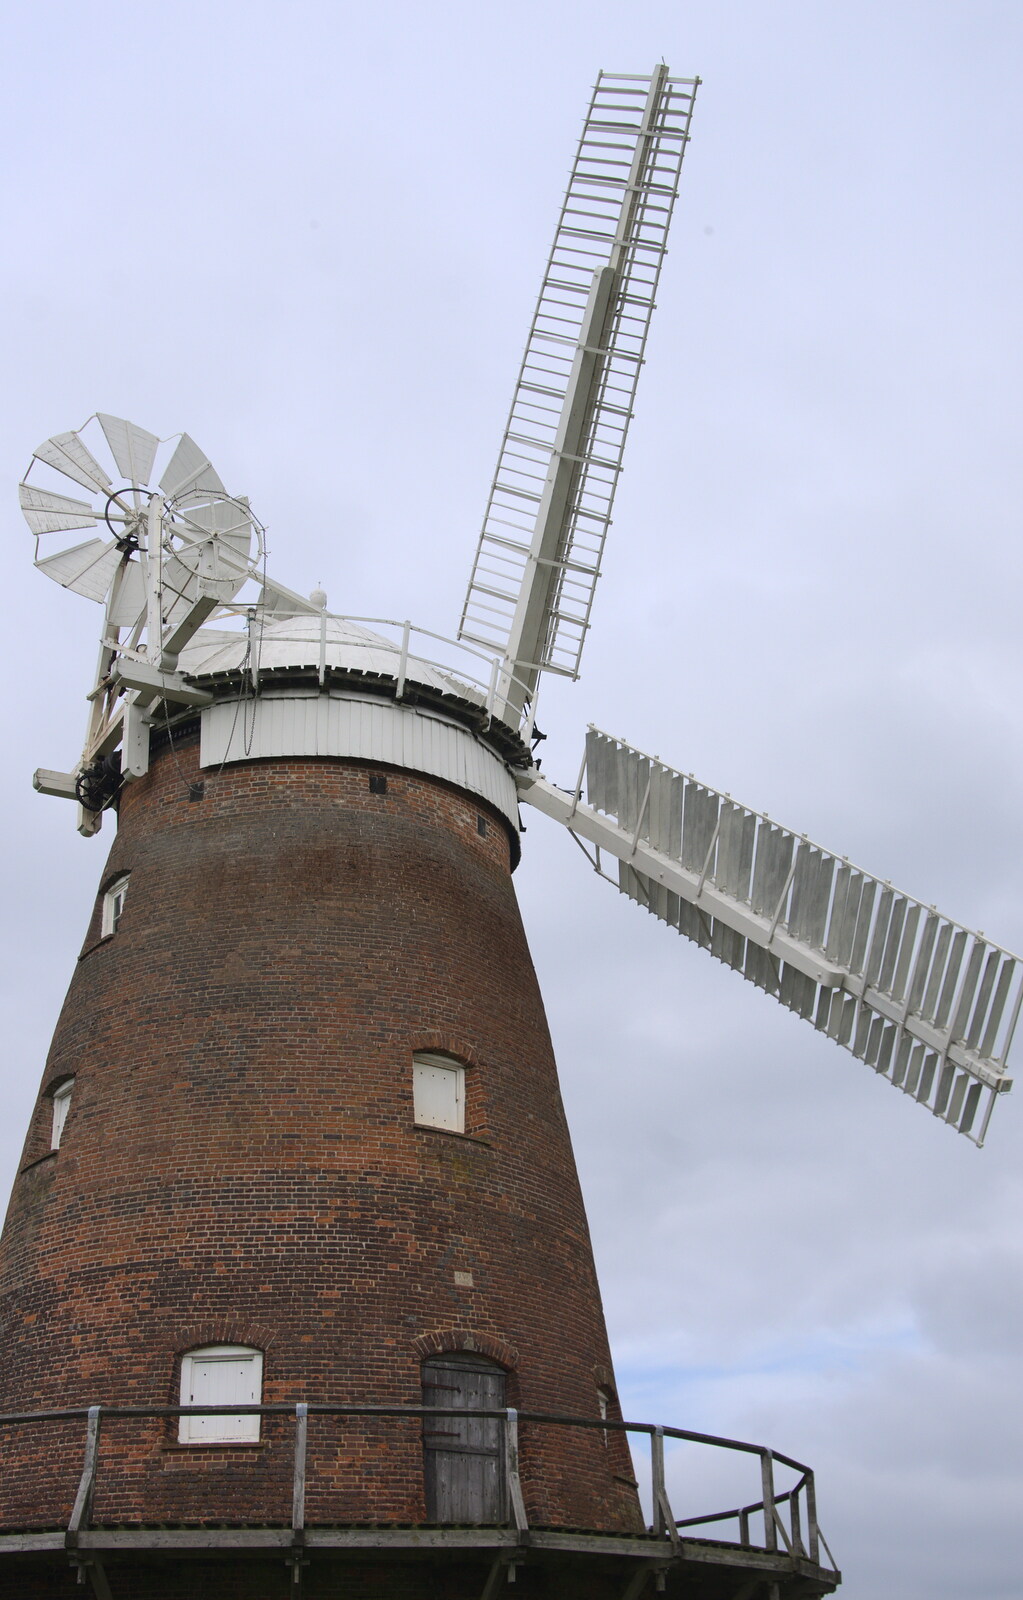 John Webb's Windmill from A Postcard From Thaxted, Essex - 7th May 2017